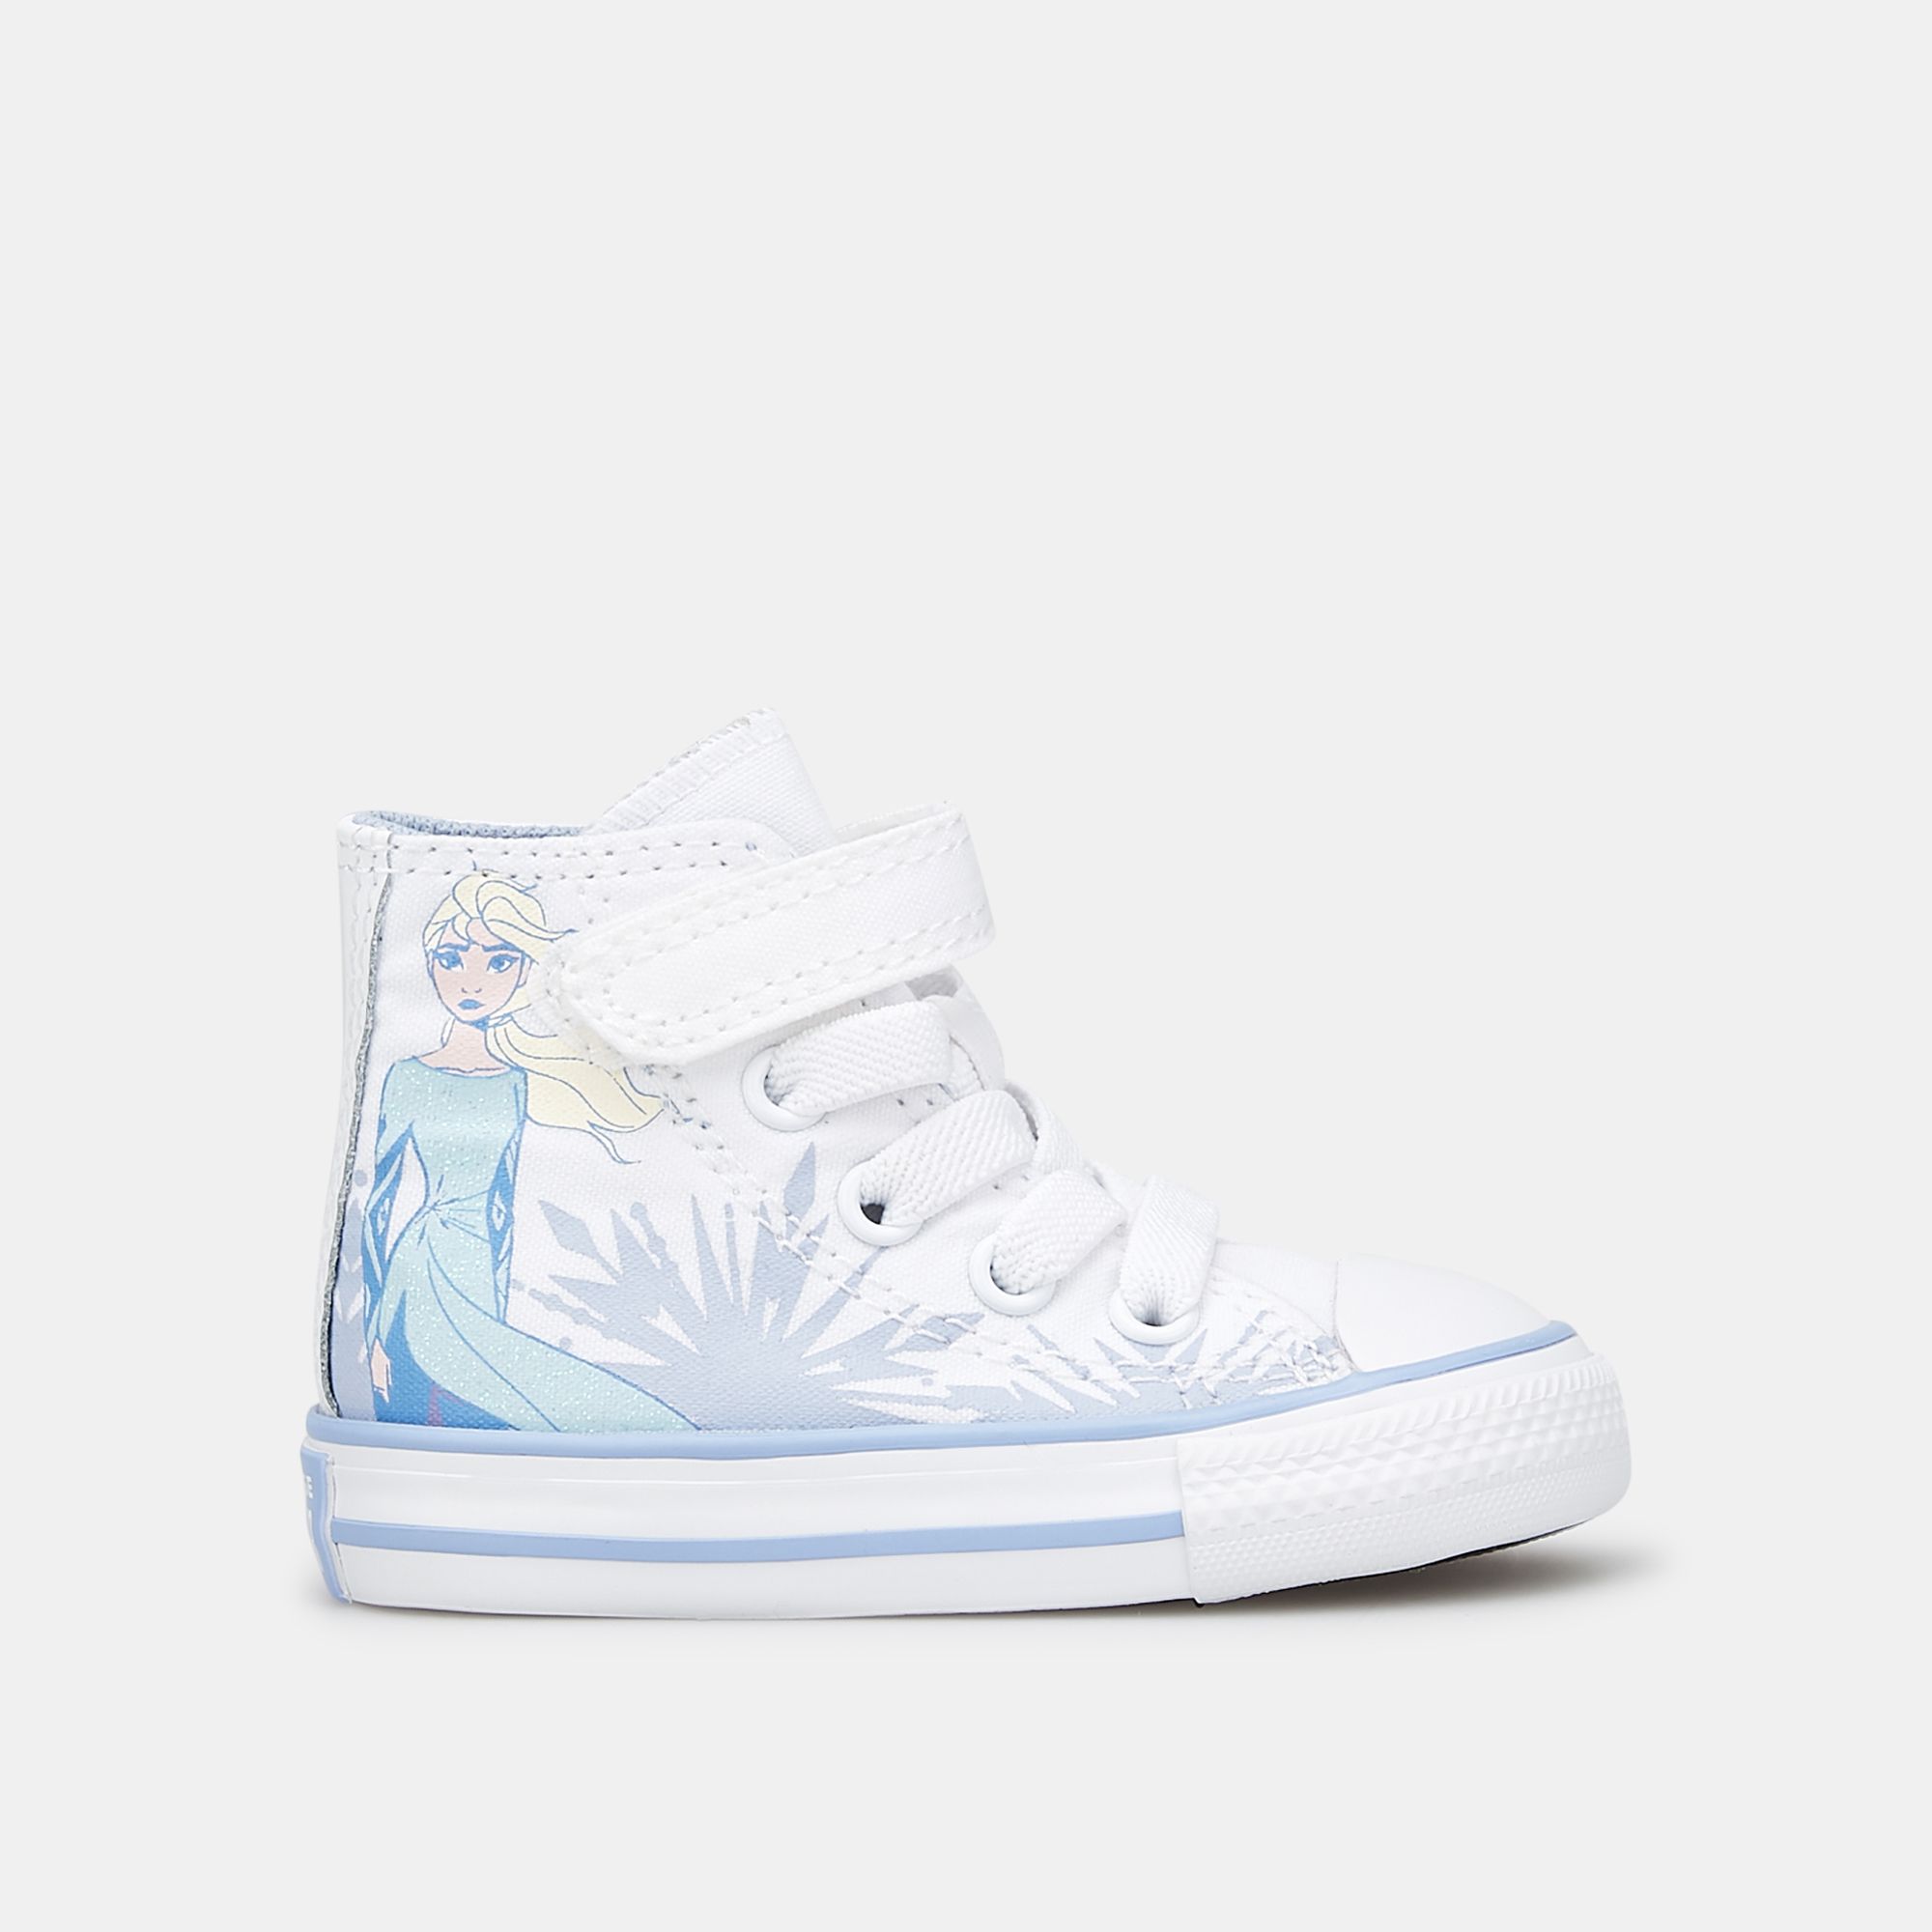 youth converse chuck taylor all star hi sneaker